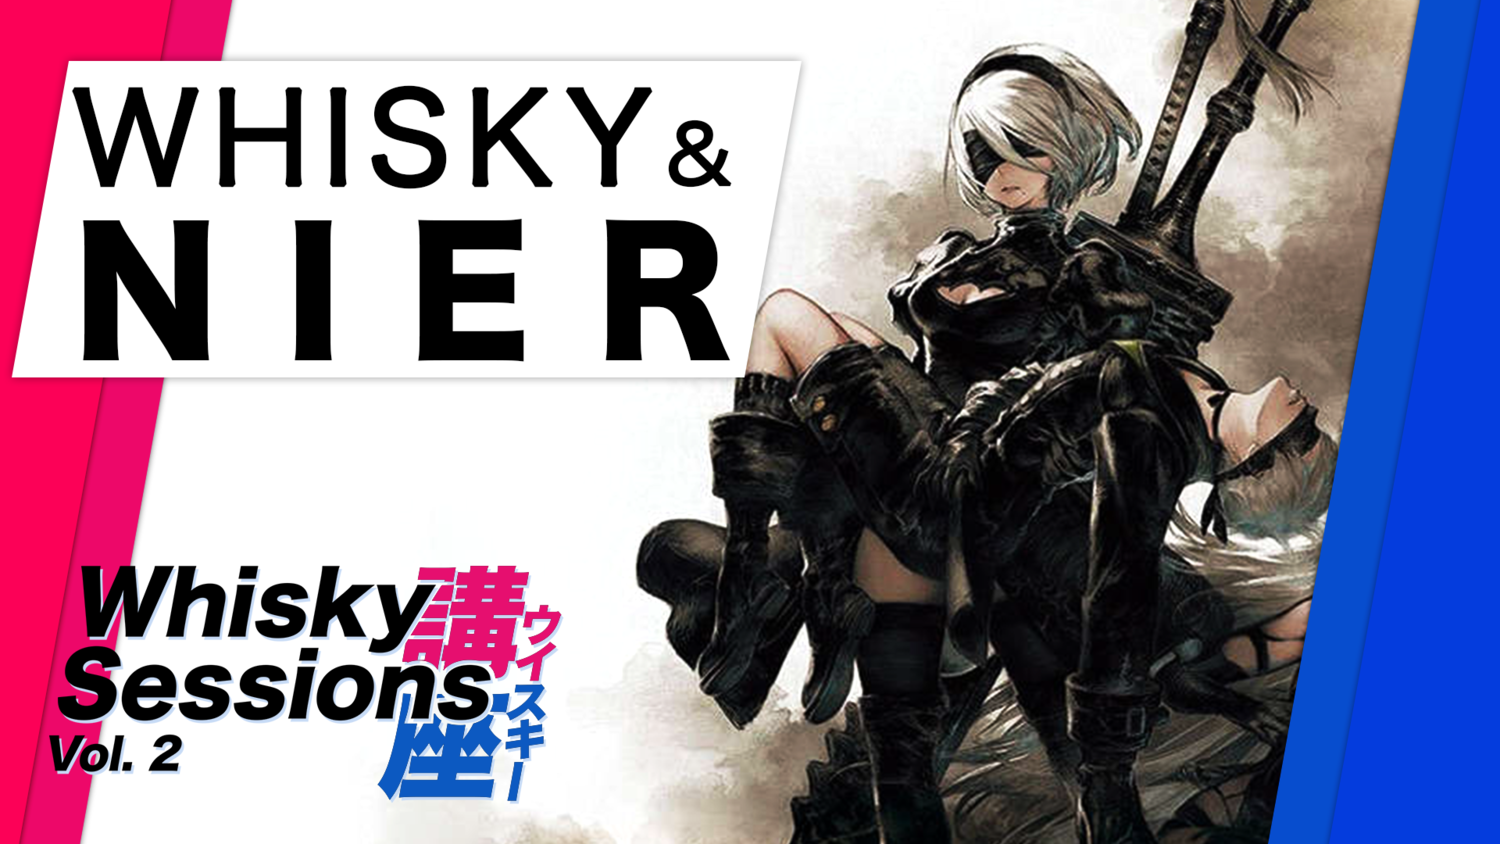 Whisky Sessions Vol 2 - Nier Automata